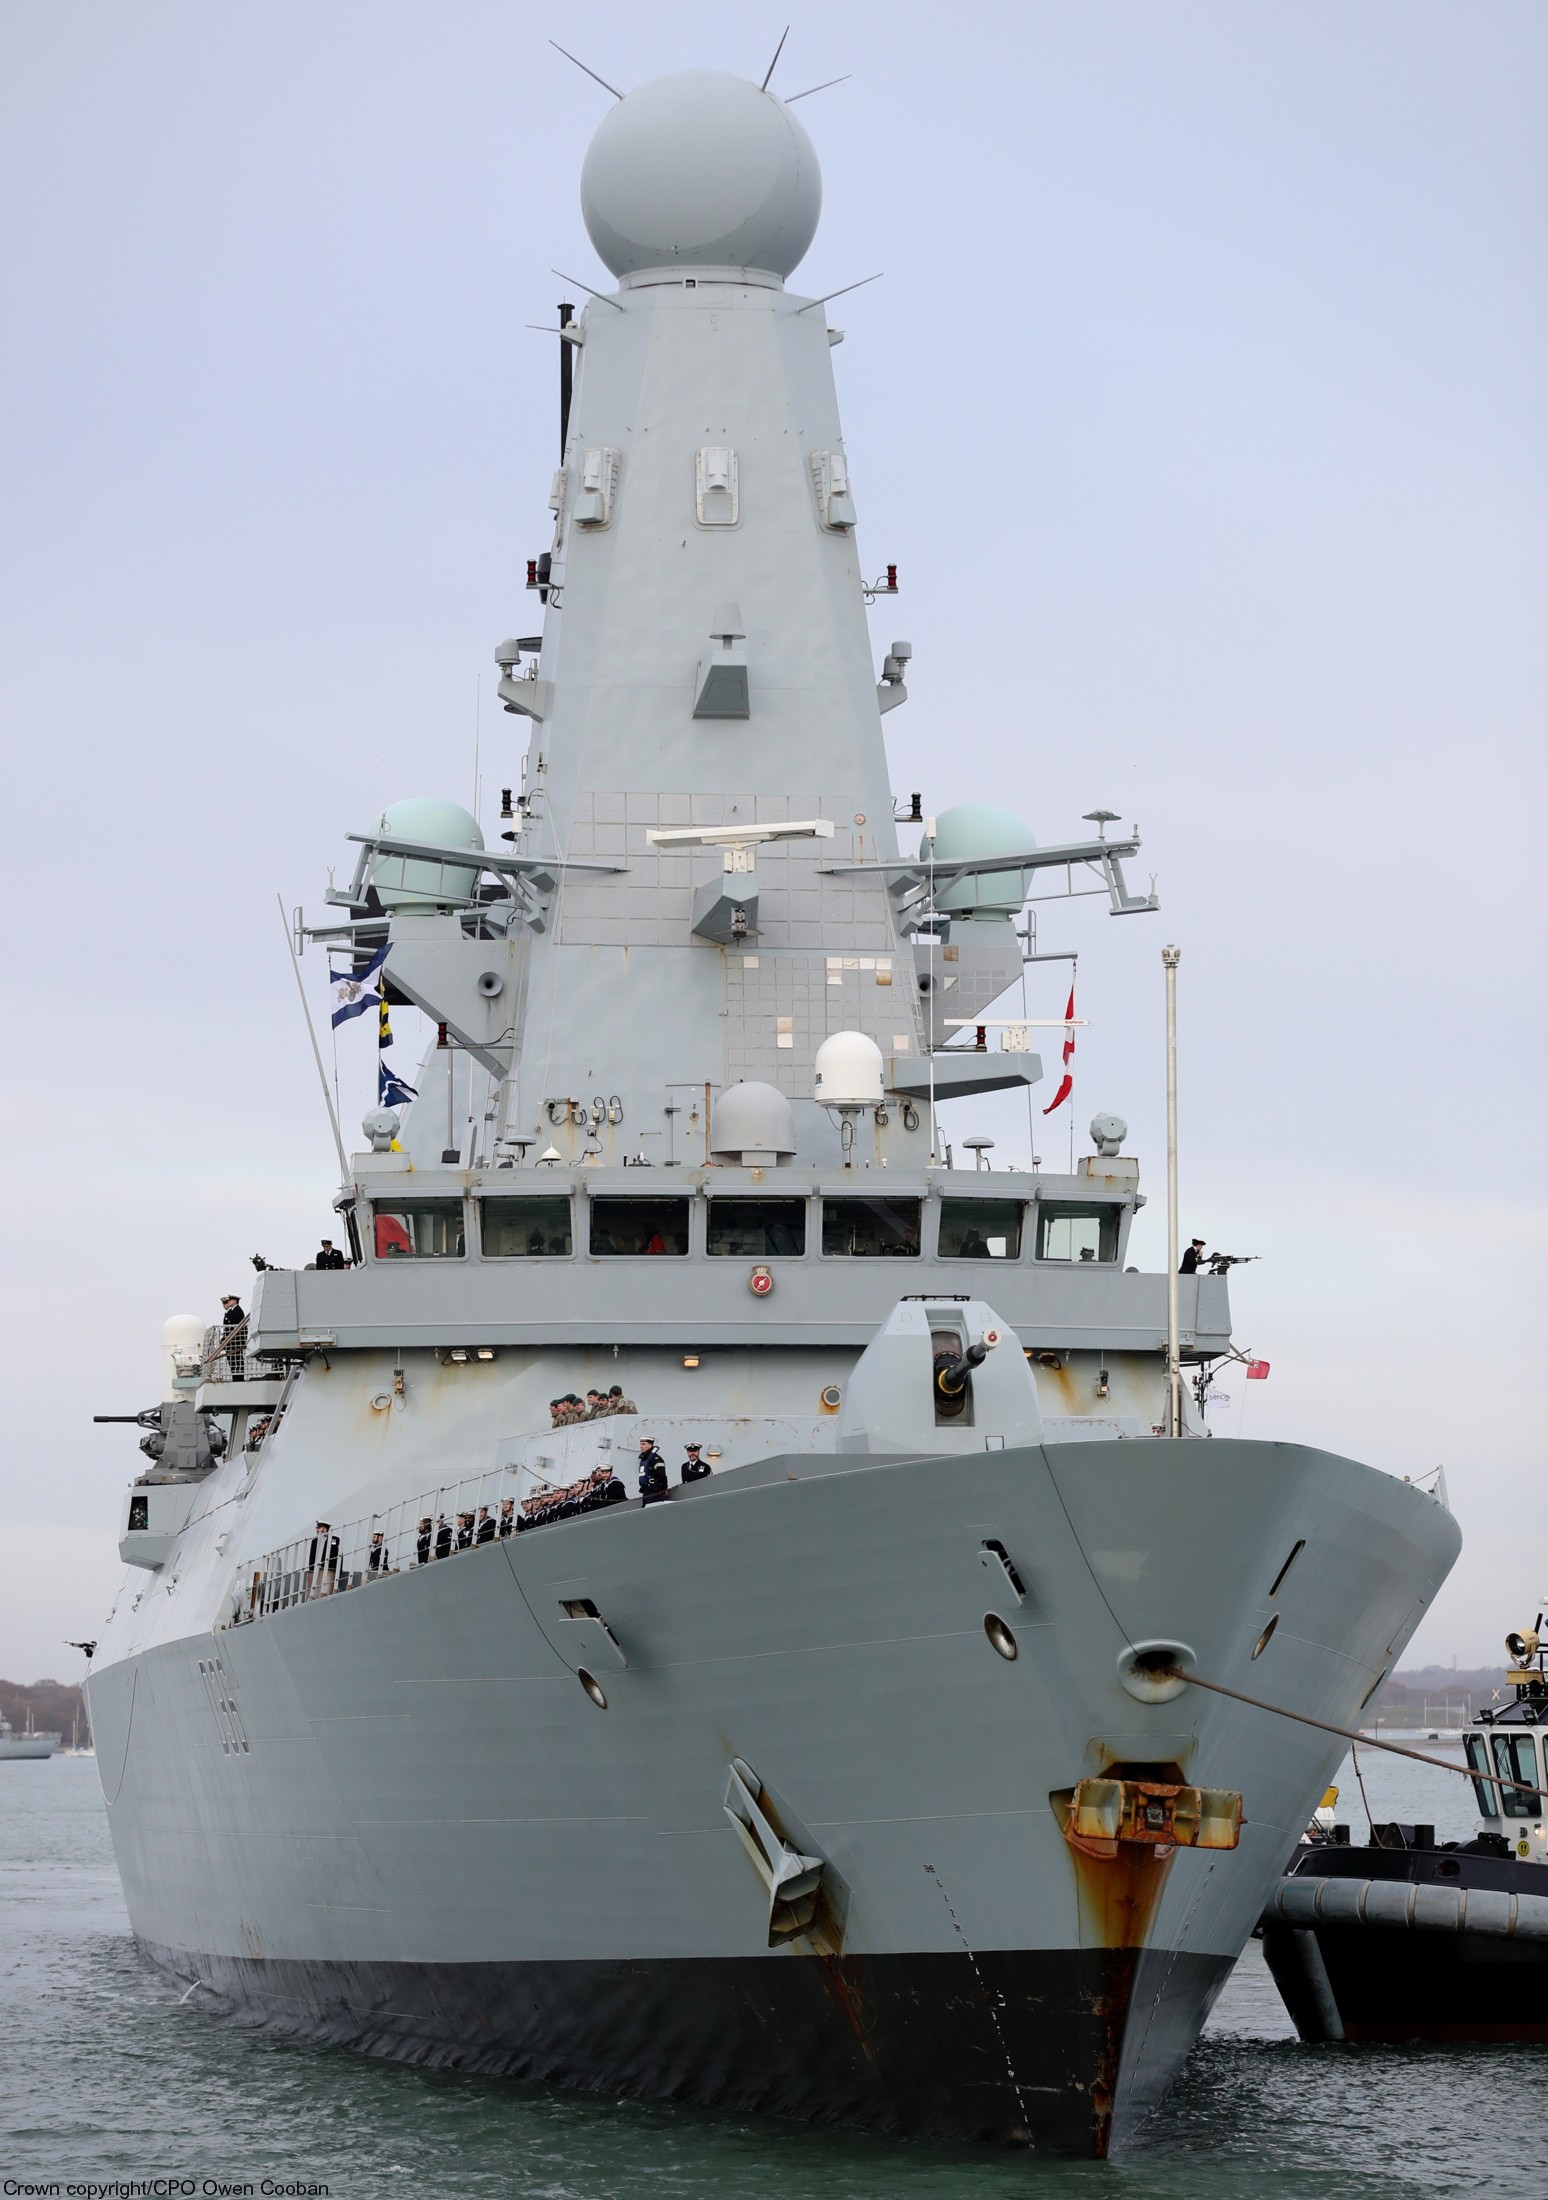 d36 hms defender d-36 type 45 daring class guided missile destroyer ddg royal navy sea viper 26